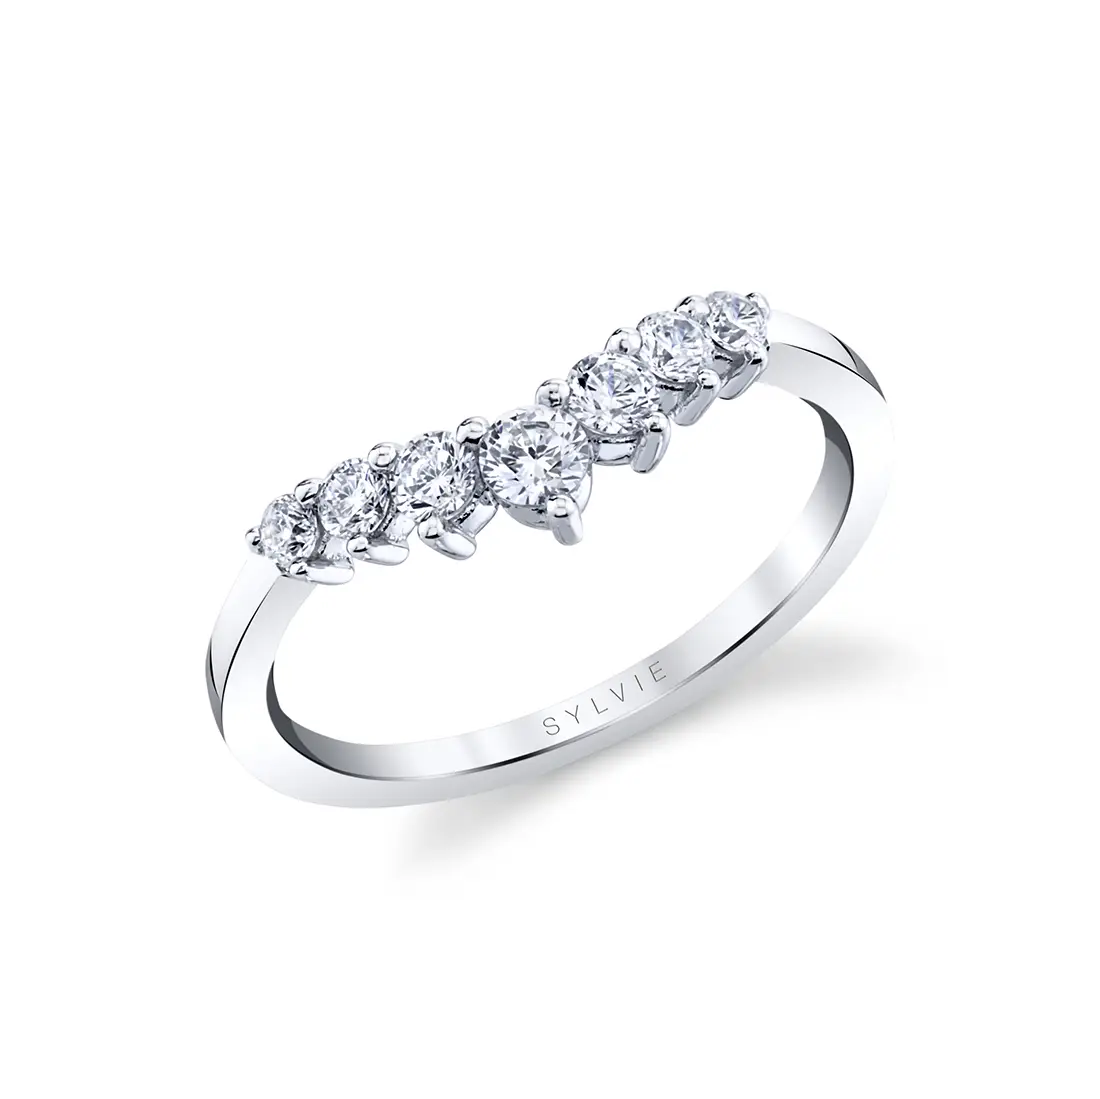 curved diamond wedding ring in white gold